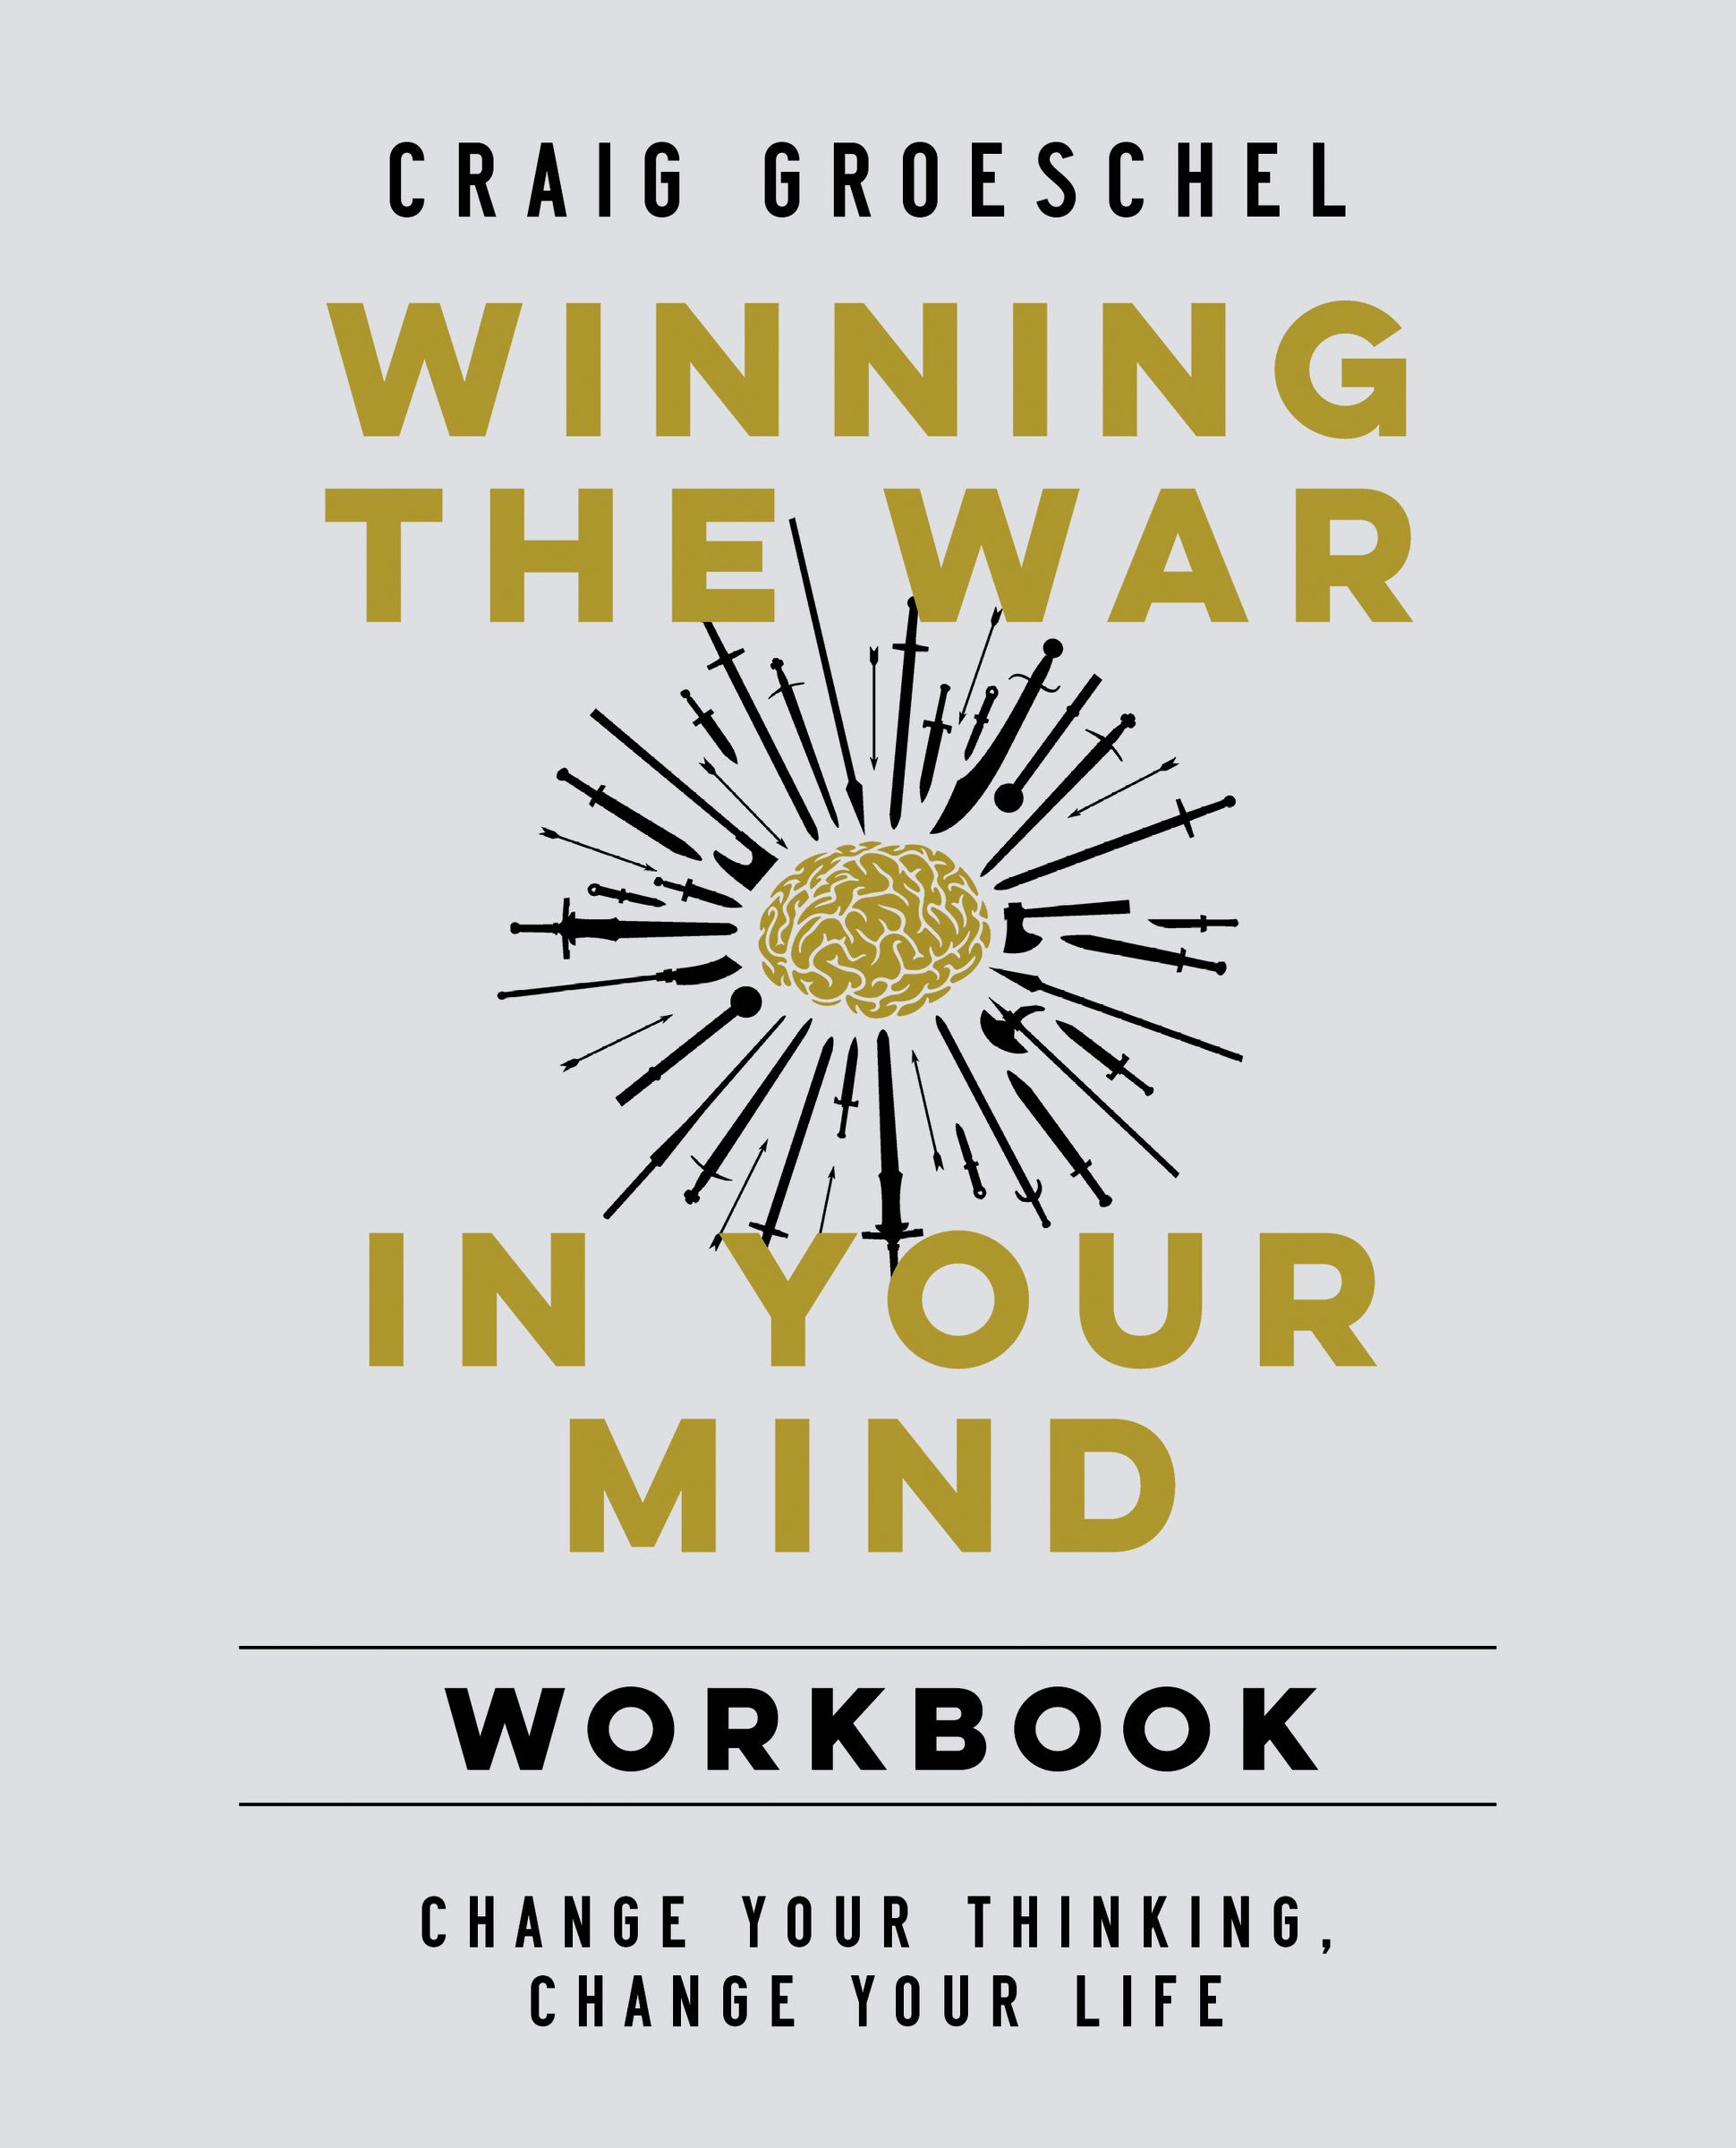 Winning the War in Your Mind Workbook: Change Your Thinking, Change Your Life PDF